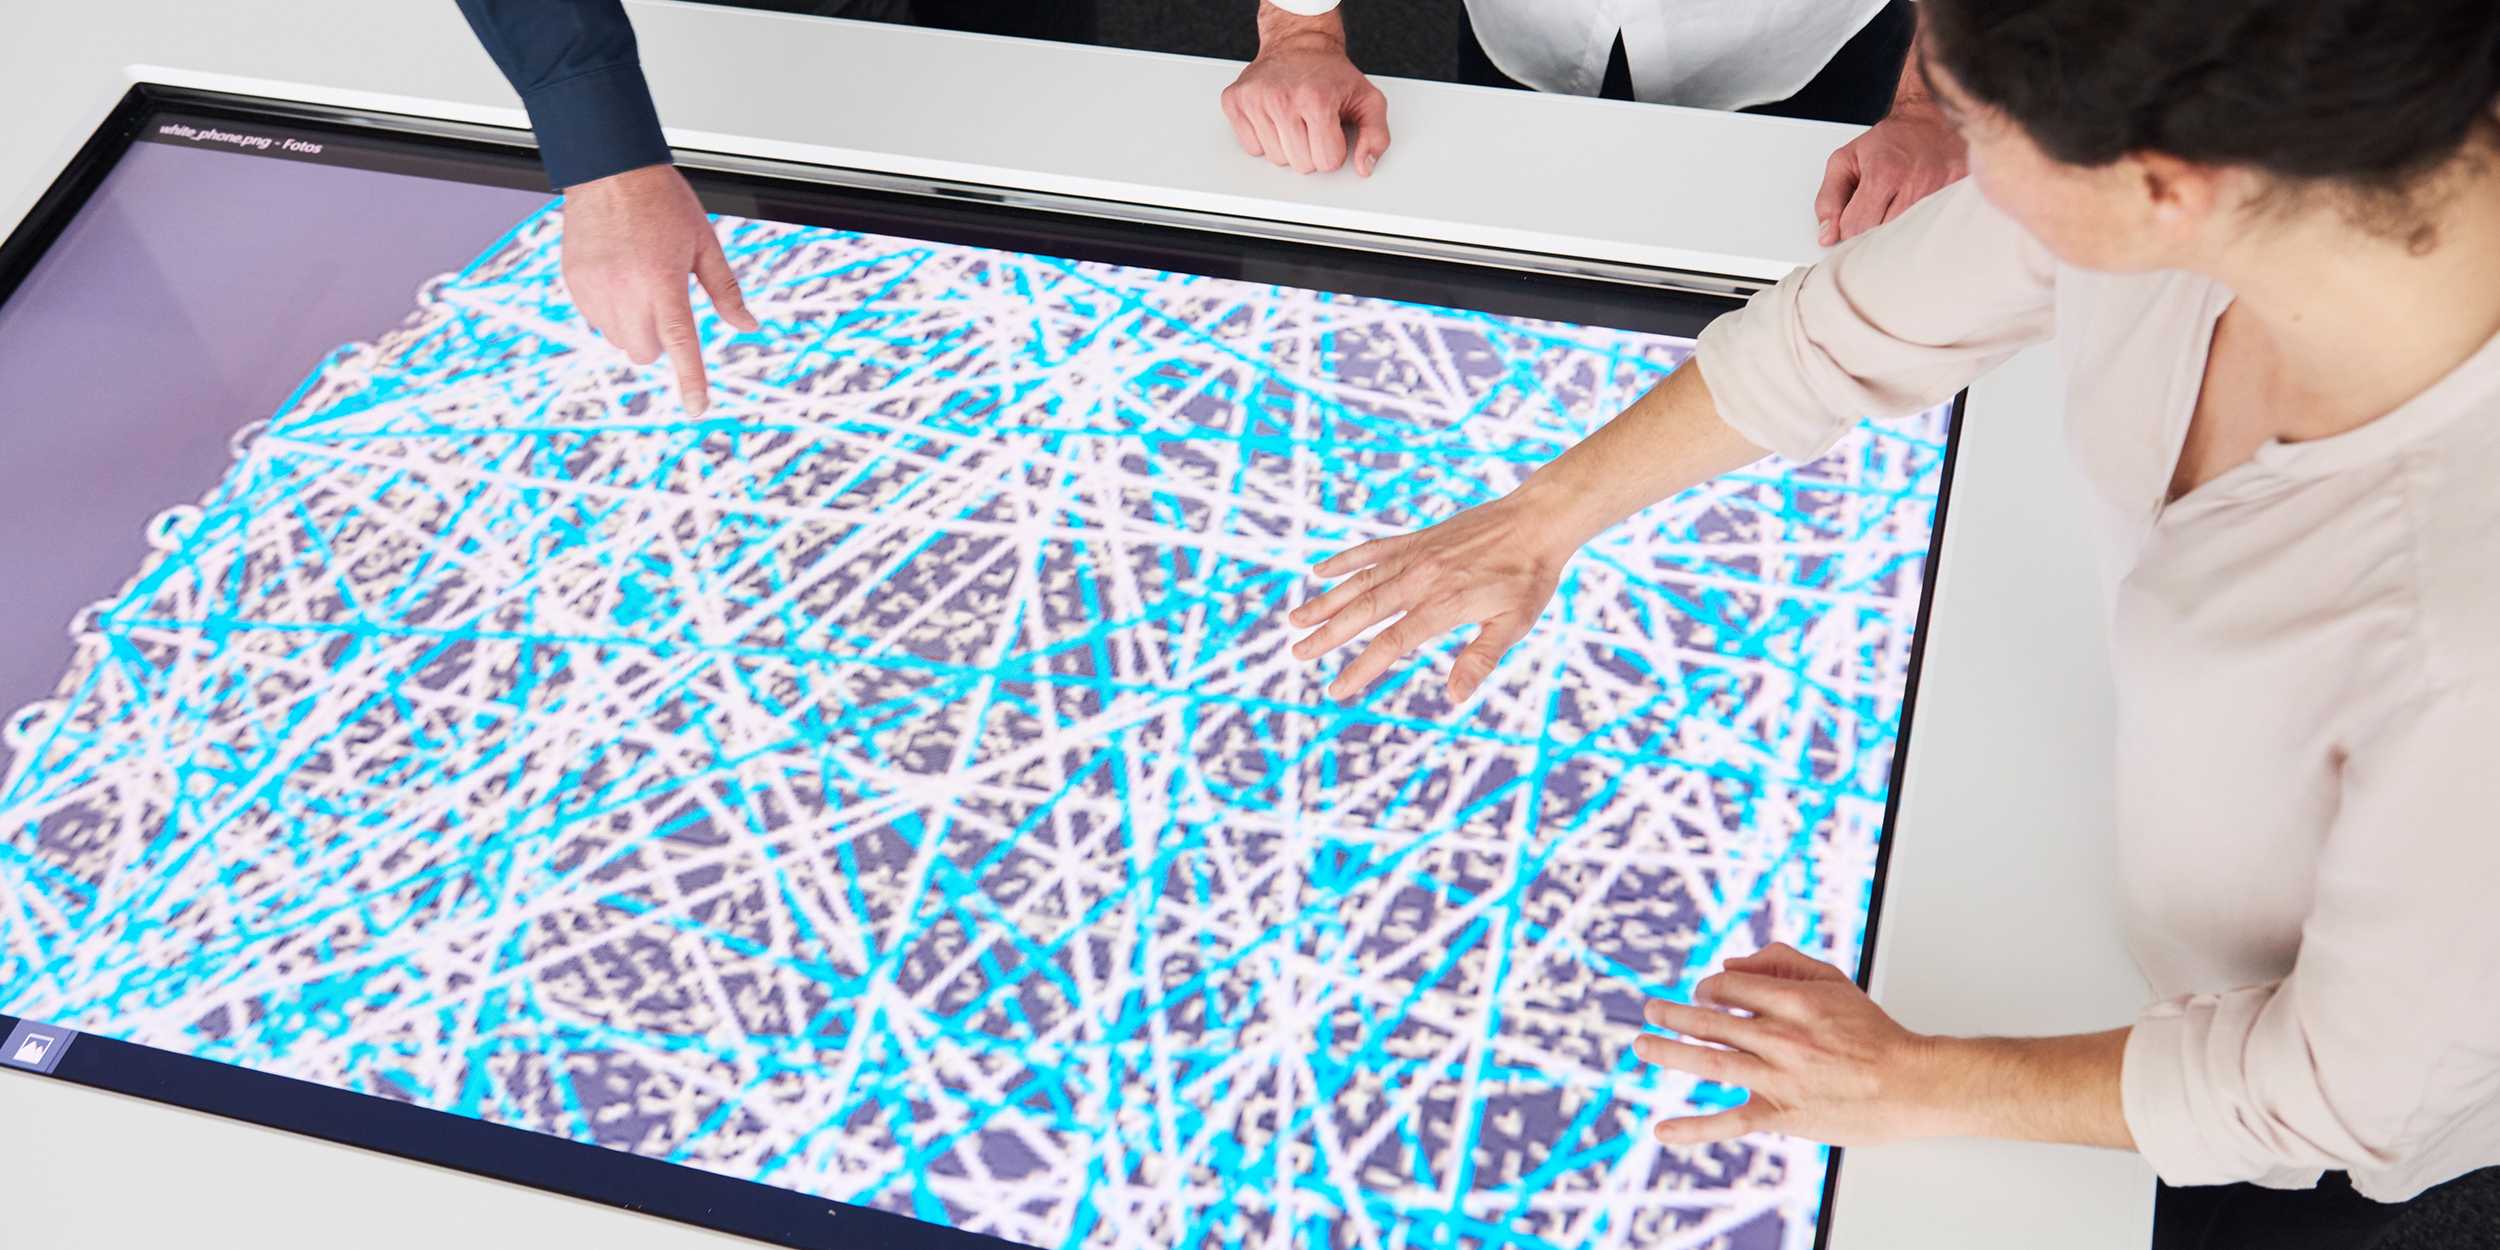 Two people point with their hands to a screen on which a network of white and blue lines can be seen.